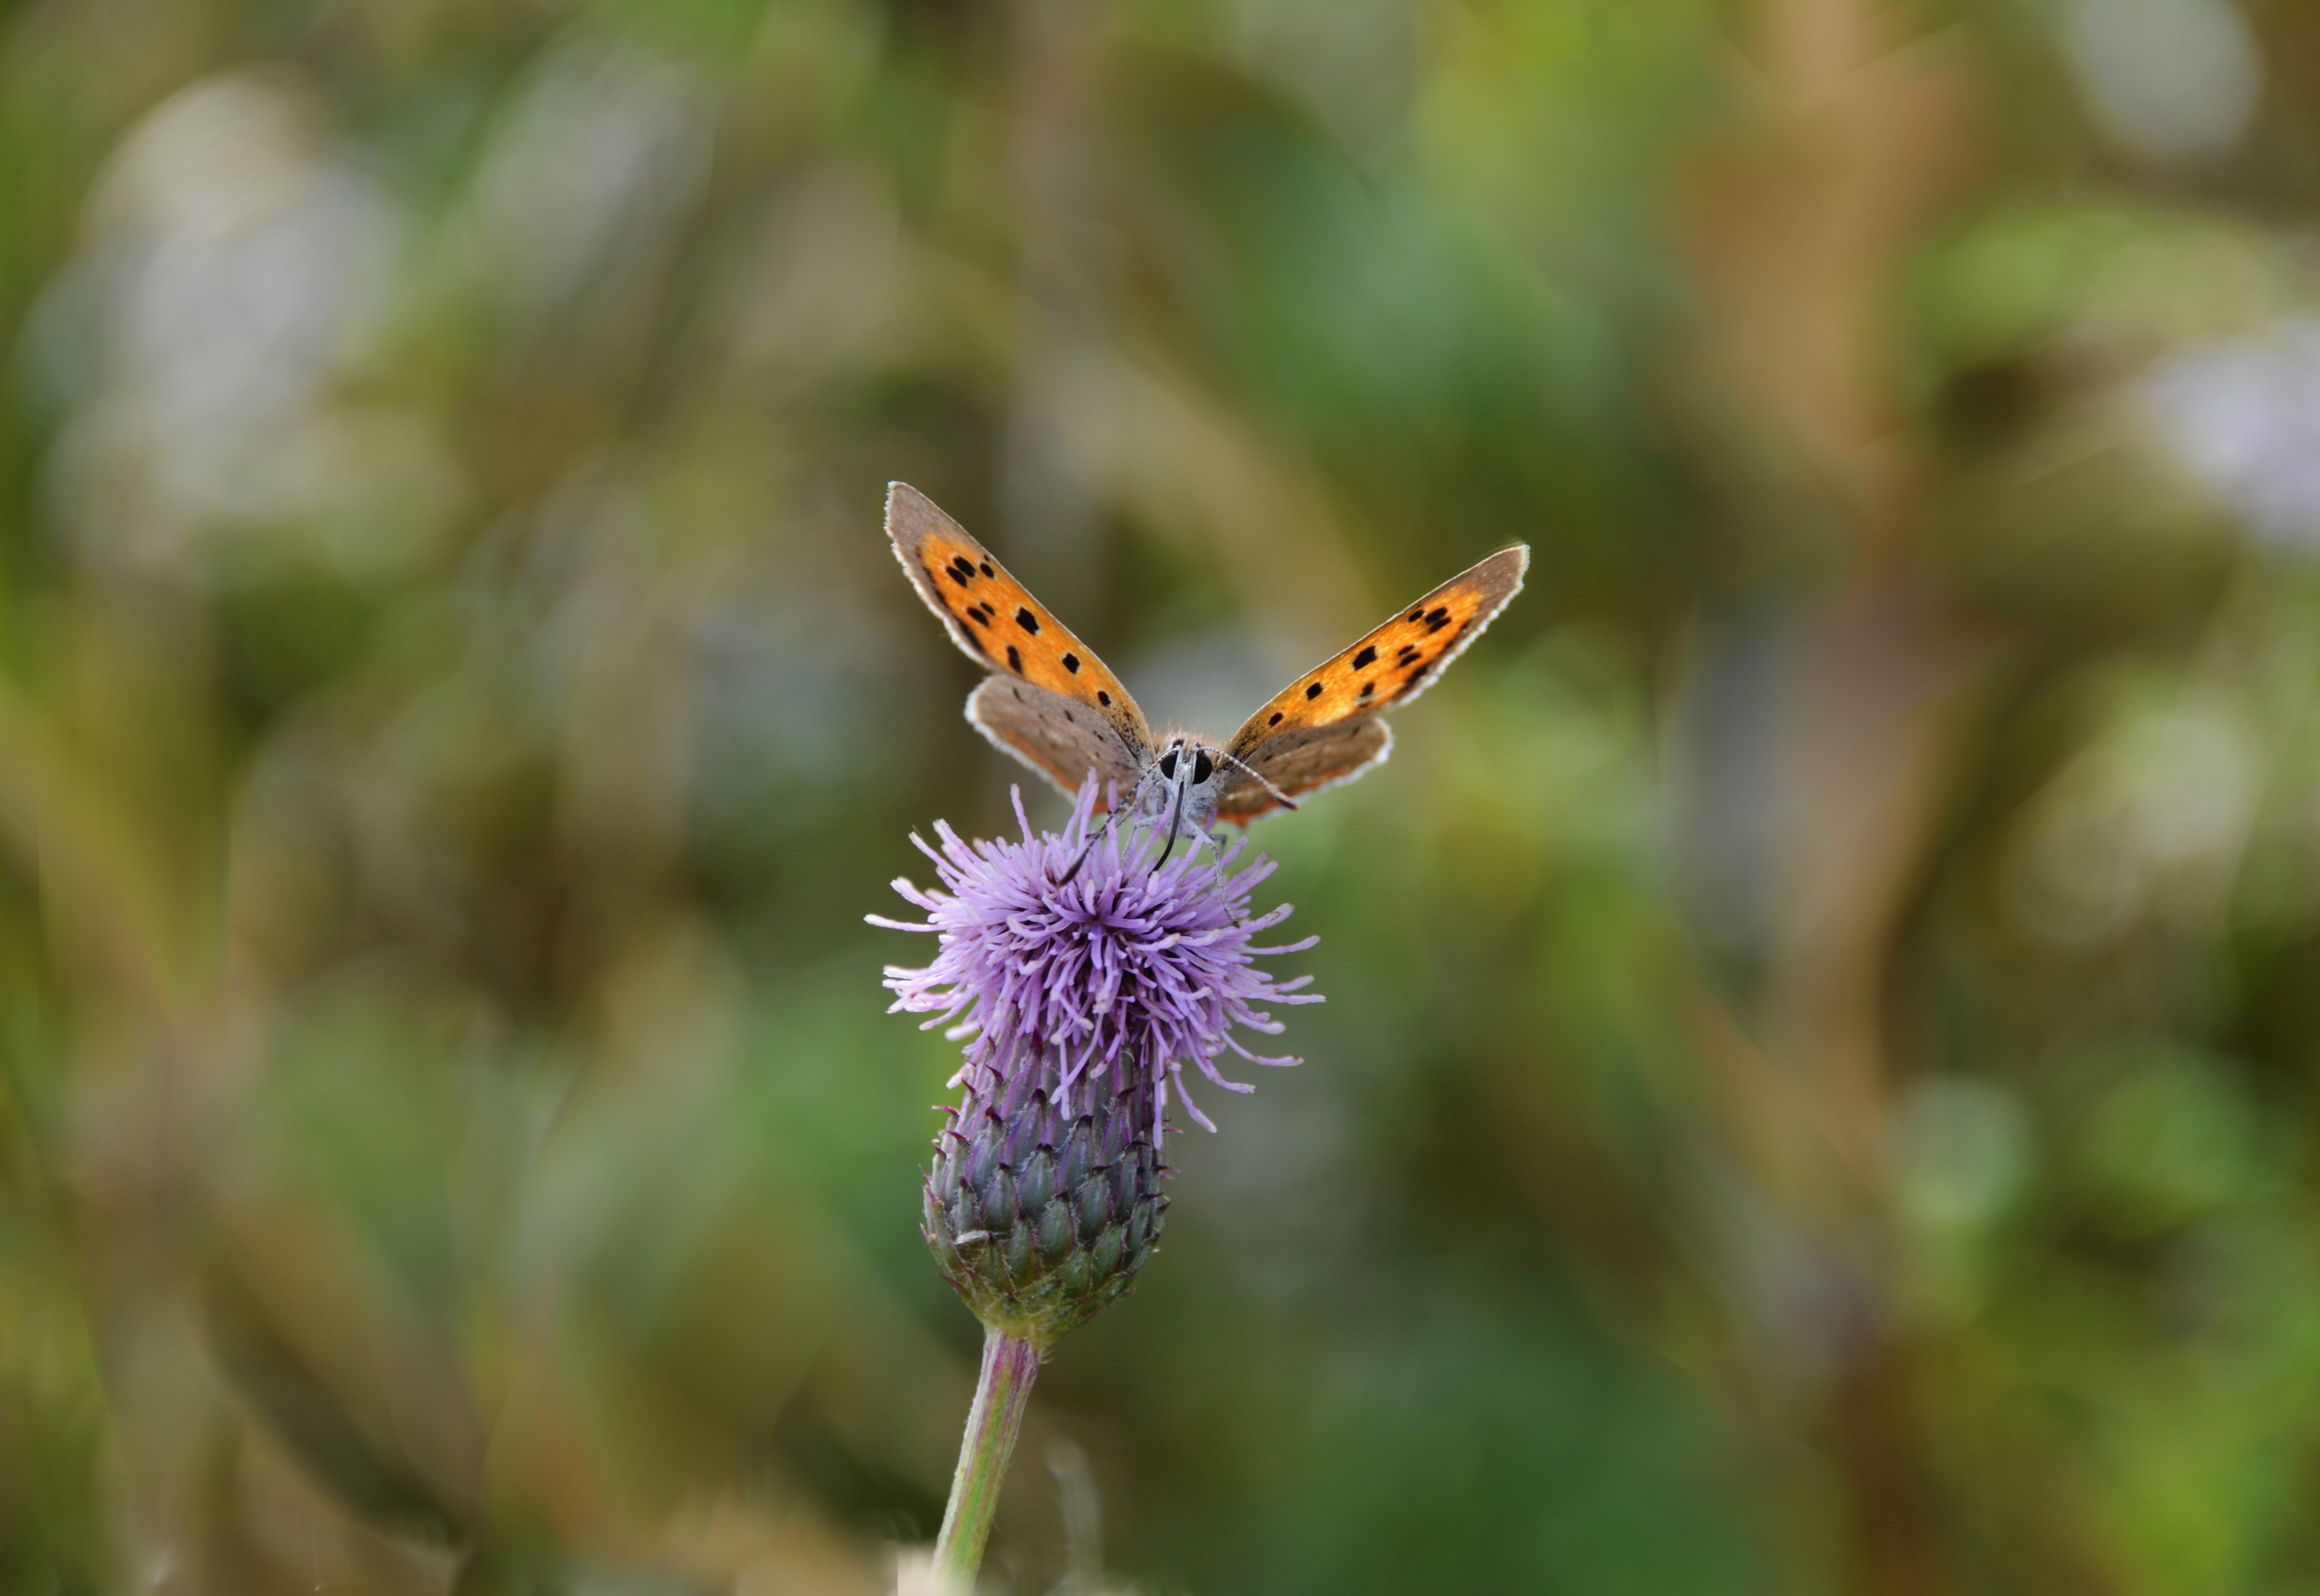 Simple and effective ways to attract wildlife to your garden